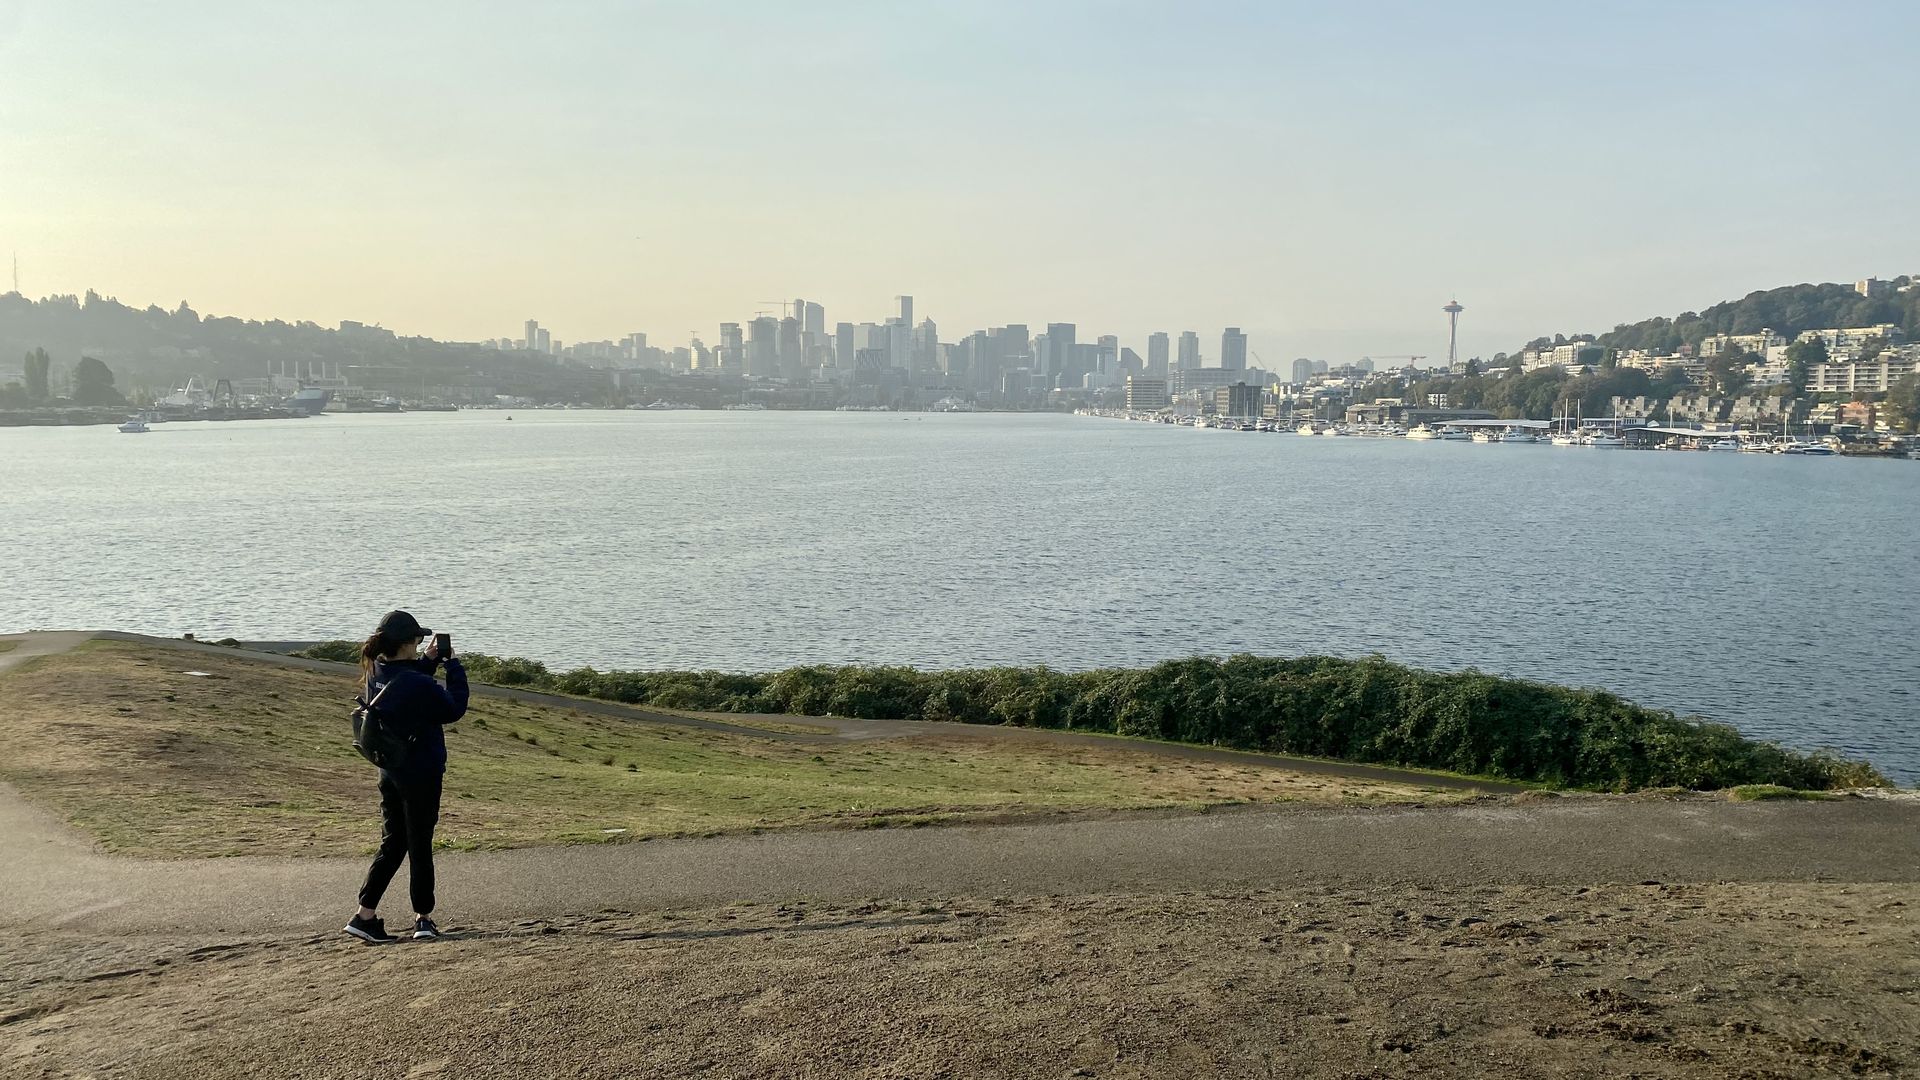 A person takes a photo of the smoky Seattle skyline from a hill on a lake.